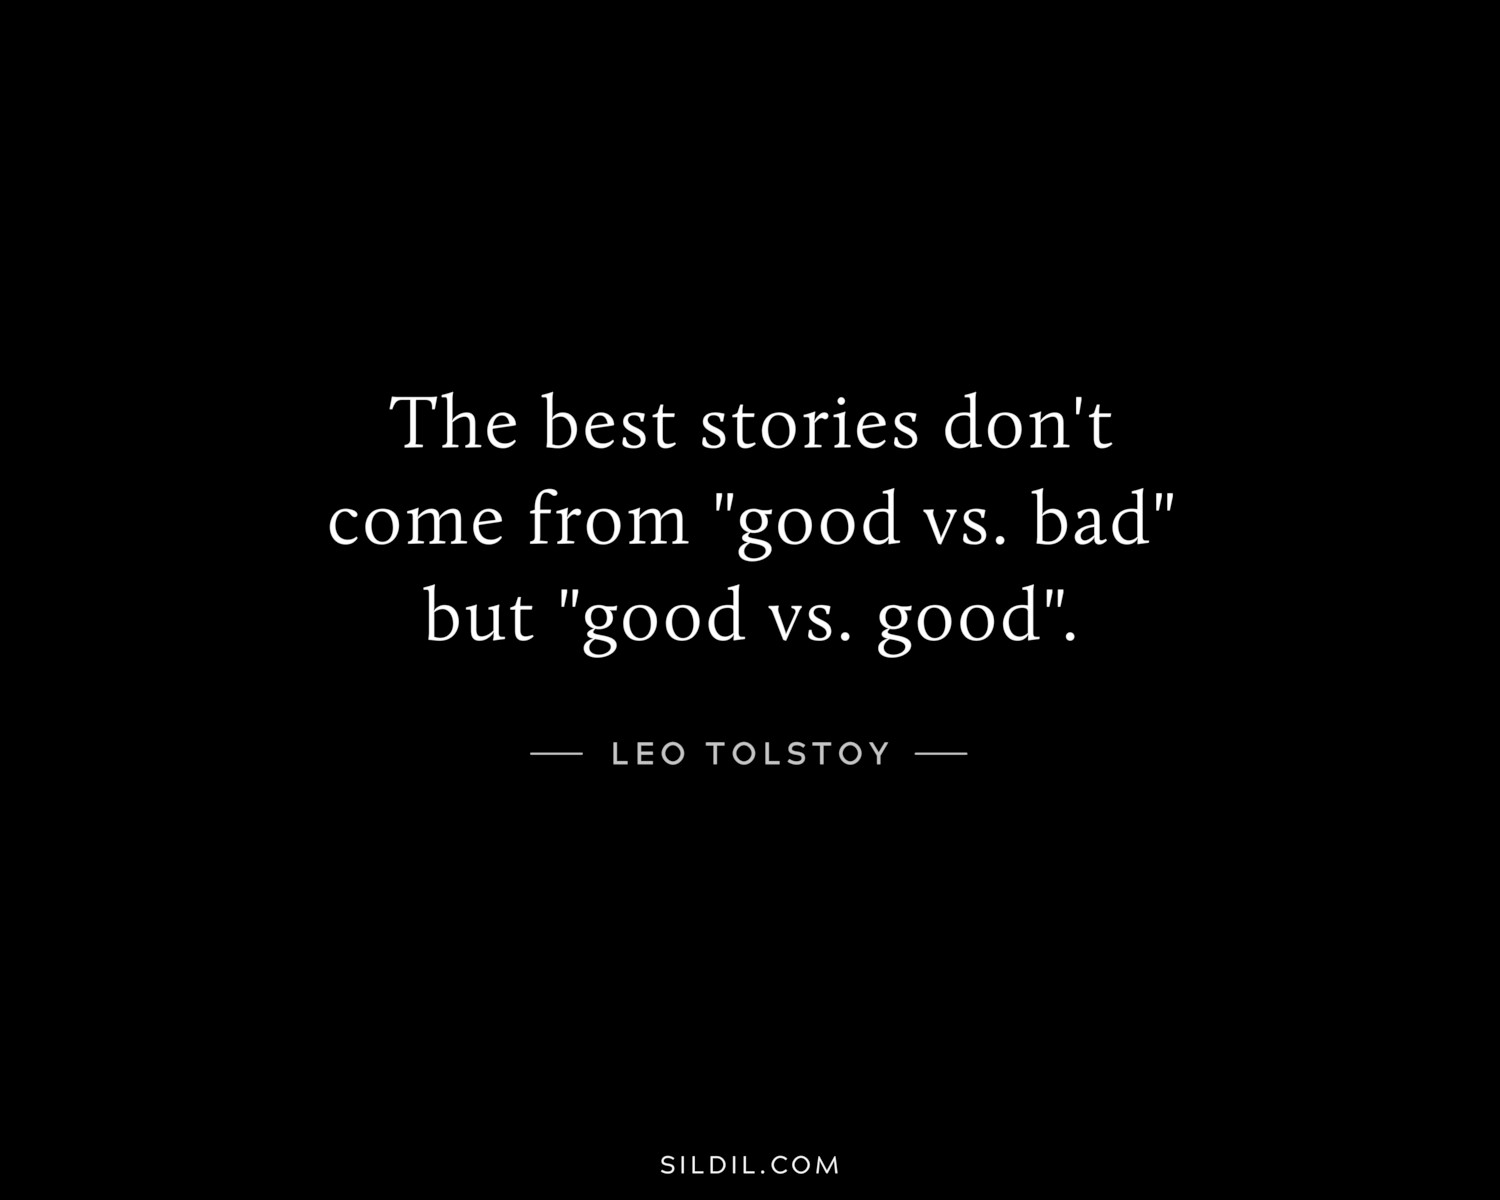 The best stories don't come from "good vs. bad" but "good vs. good".